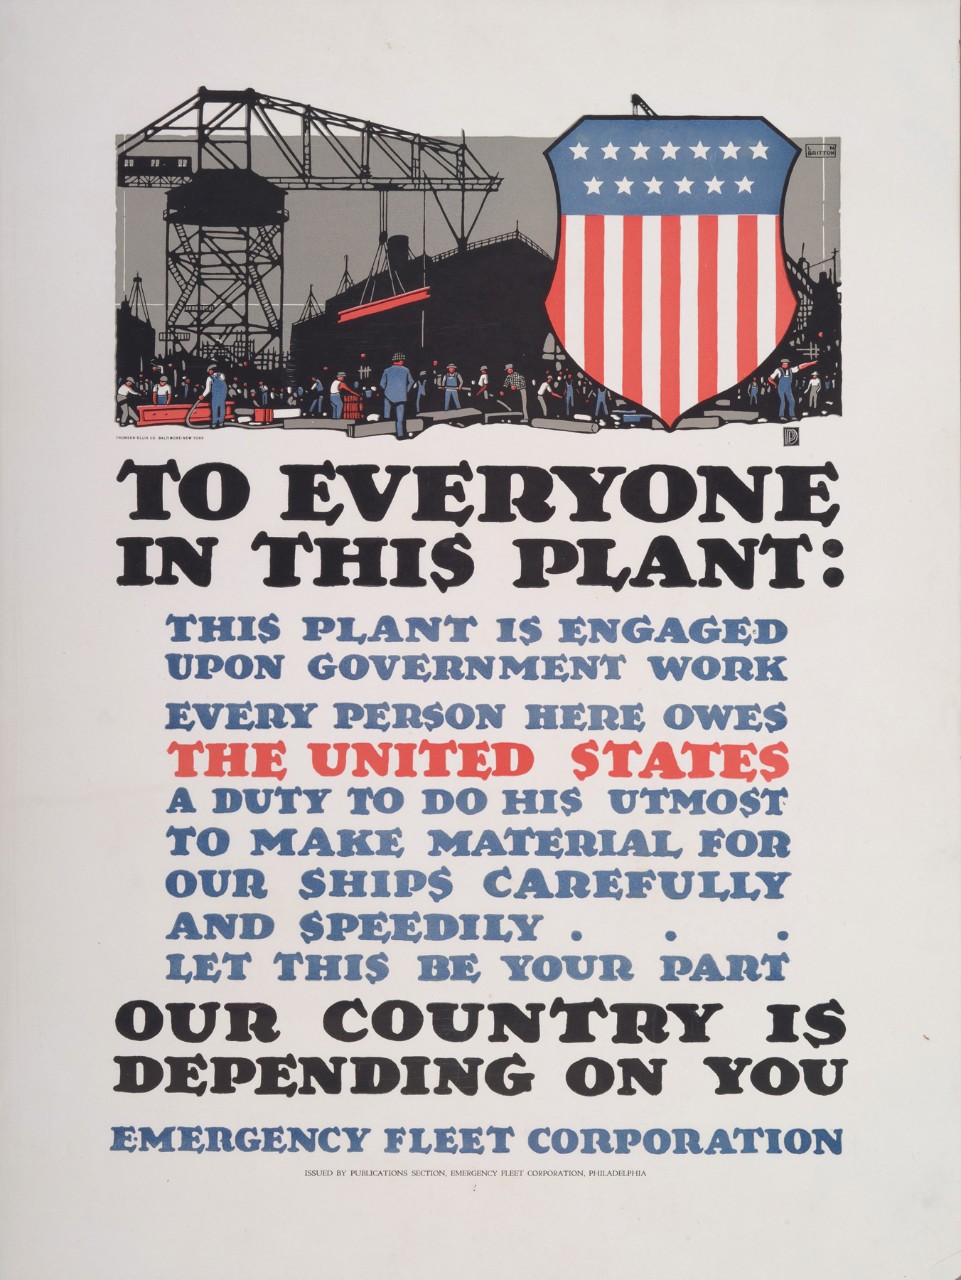 The image of of workers going to a plant the text “To everyone in this plant: this plant is engaged upon government work every person here owes the United States a duty to do his upmost to make material for our ships carefully and speedily … let this be your part our country is depending on you emergency fleet corporation"